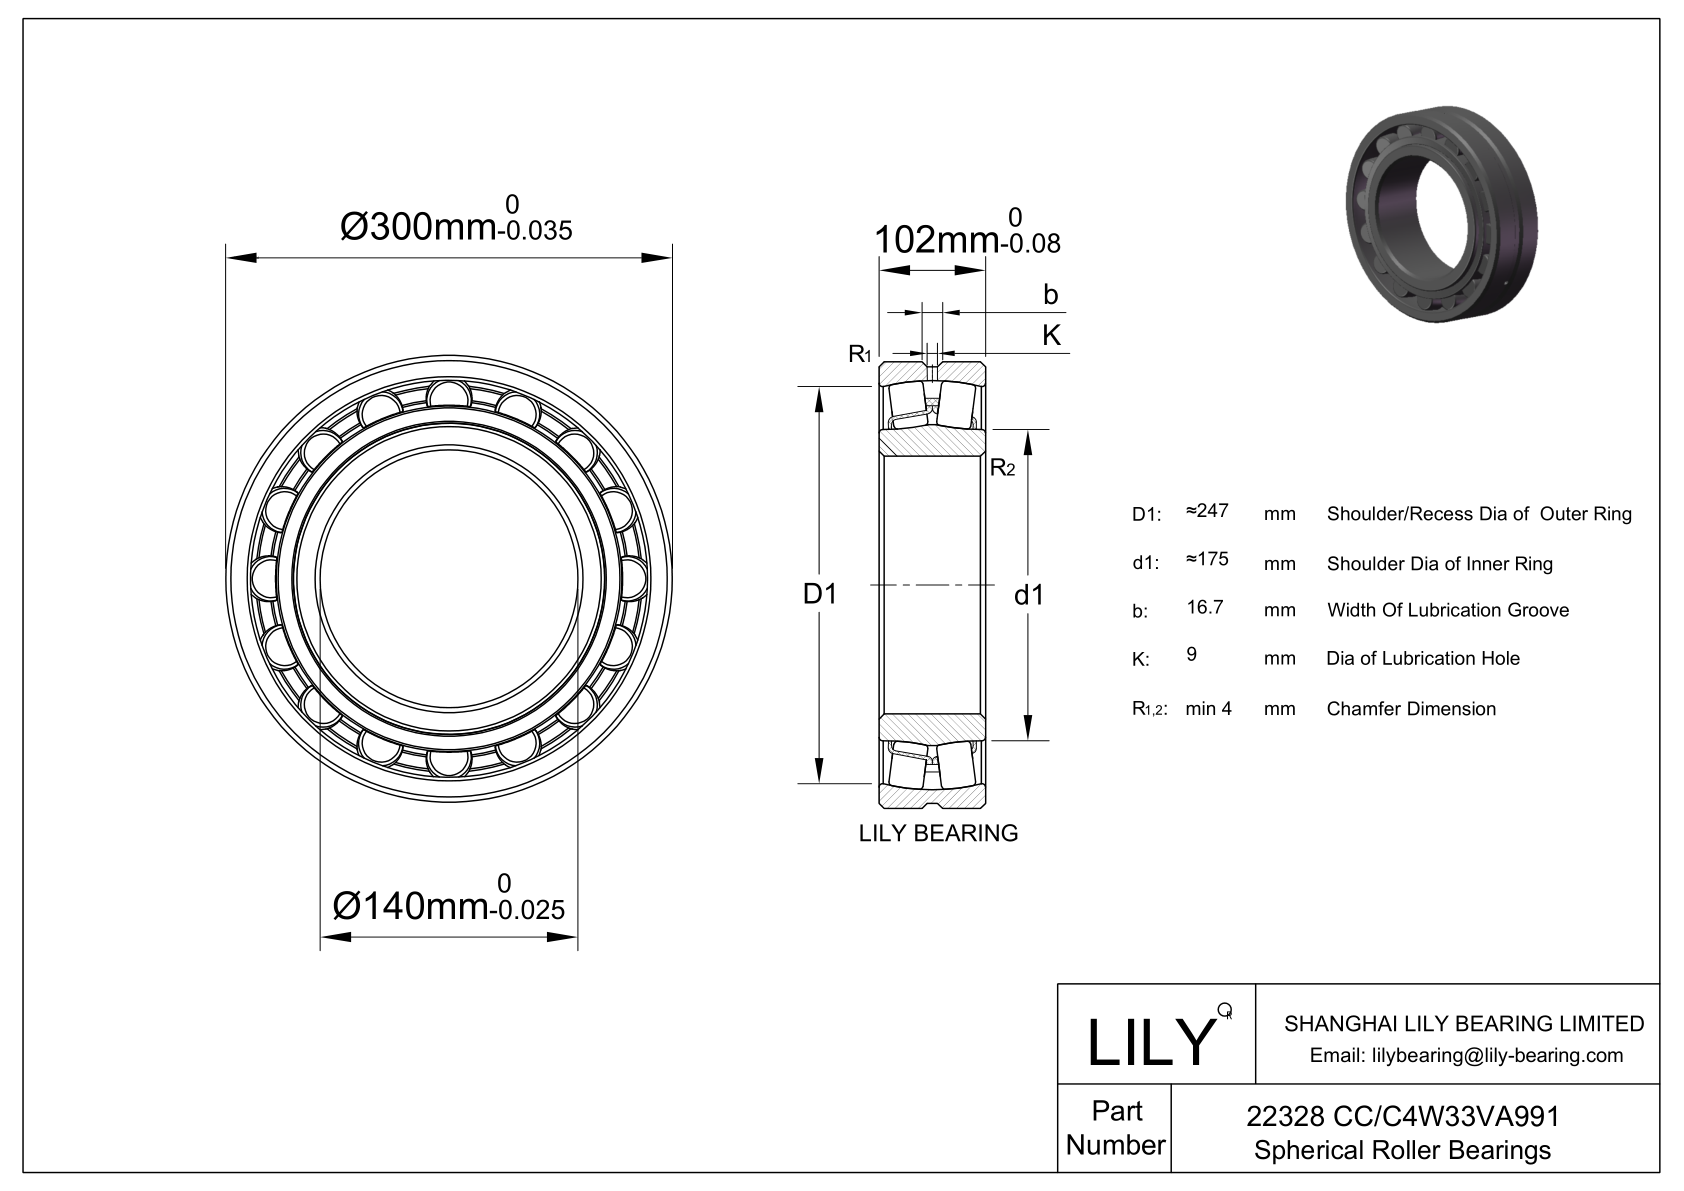 22328 CC/C4W33VA991 Double Row Spherical Roller Bearing cad drawing